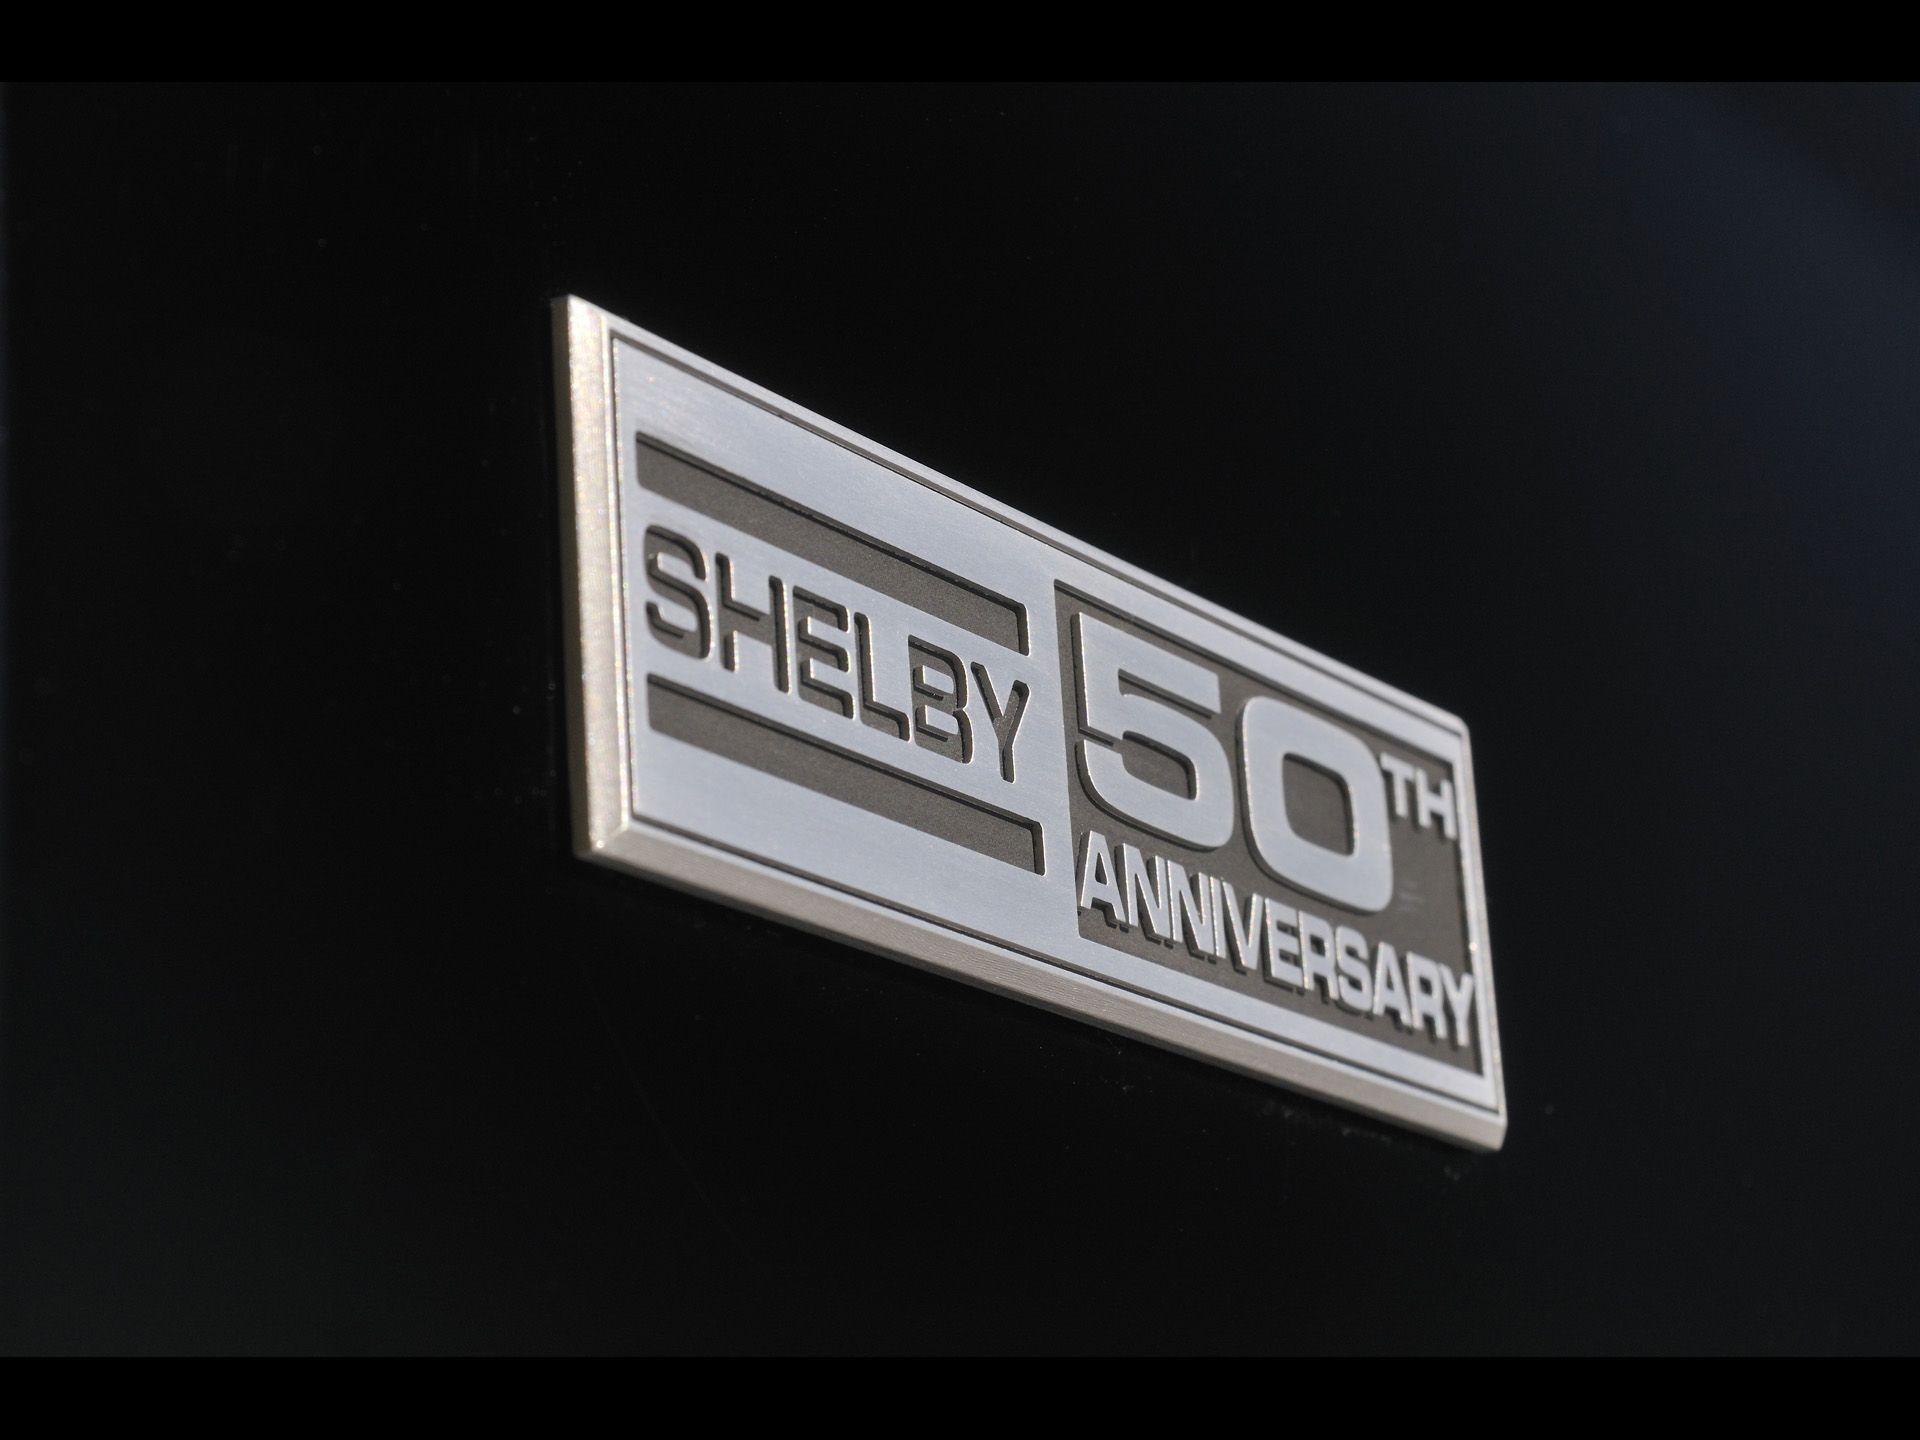 Shelby GT 50th Anniversary Edition Emblem